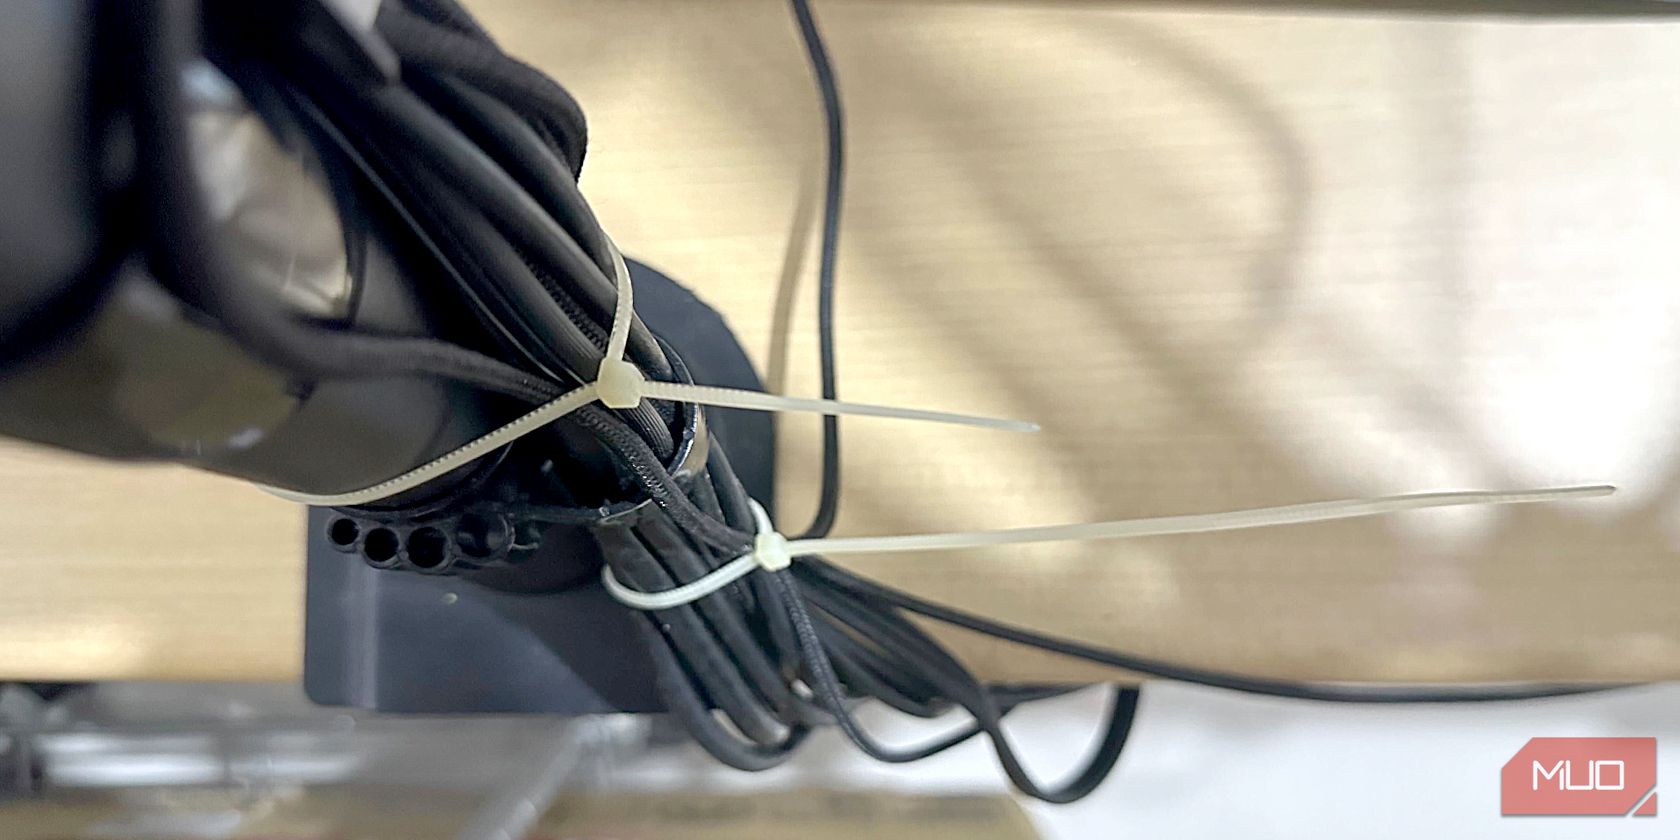 Plastic cable ties on a monitor arm